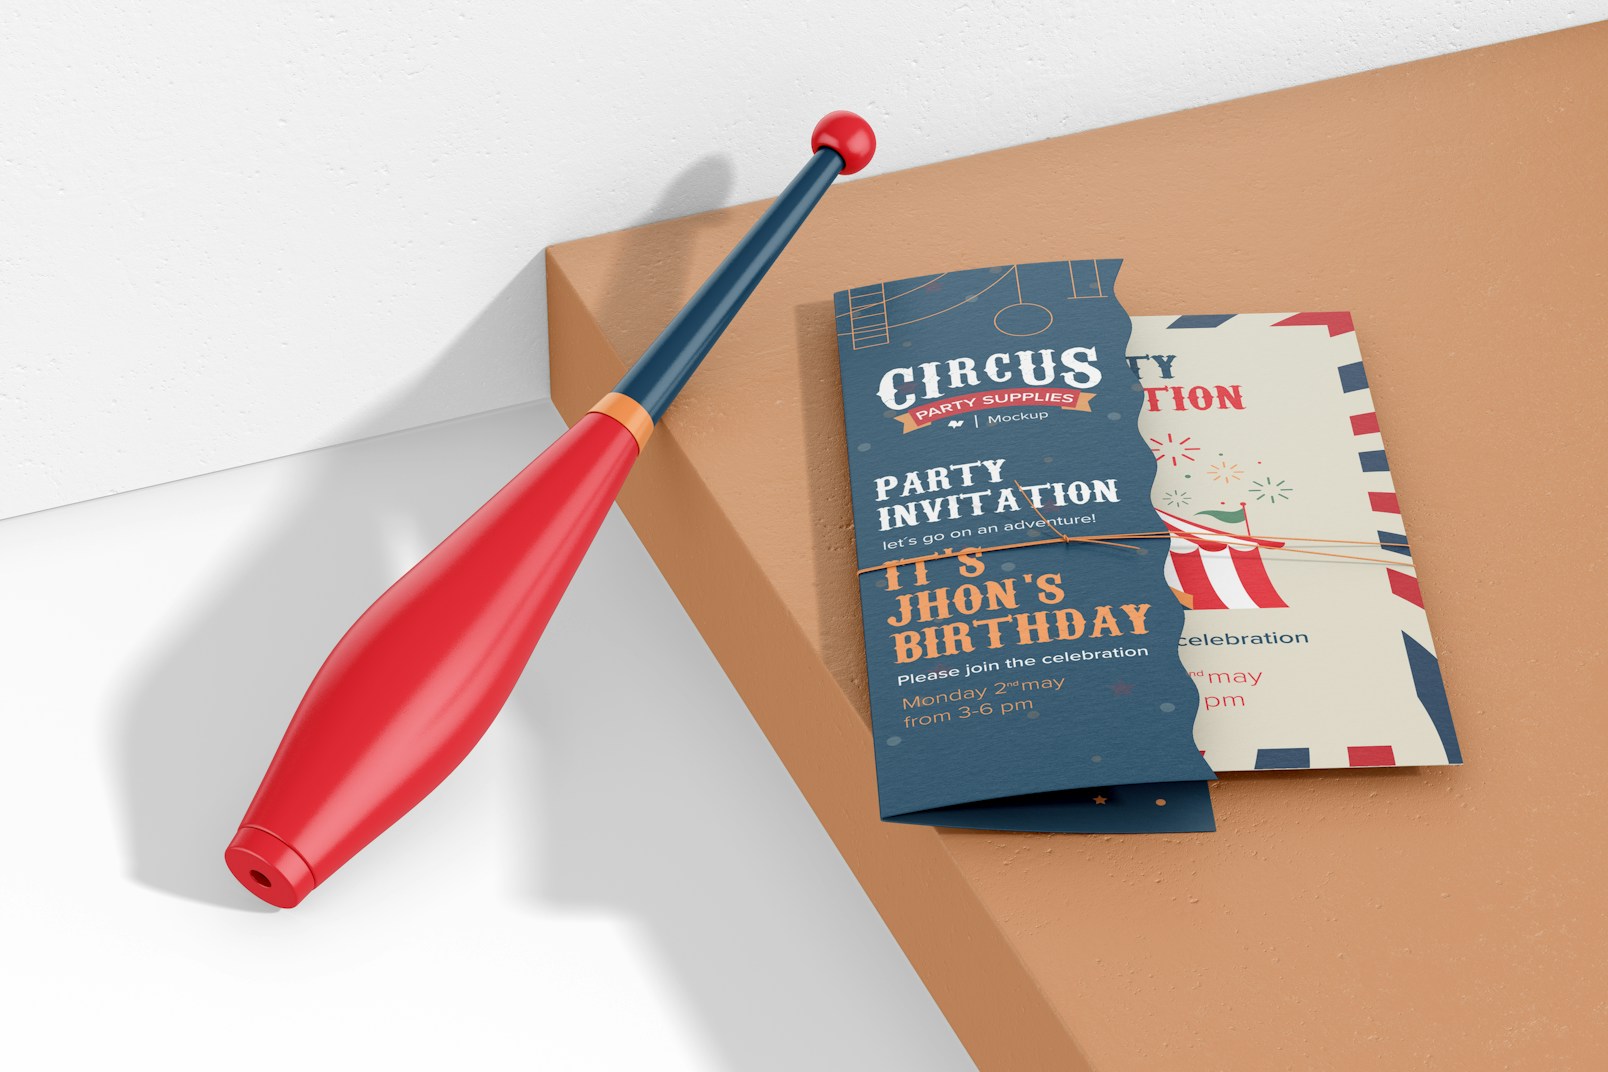 Circus Party Invitation Card Mockup, Perspective